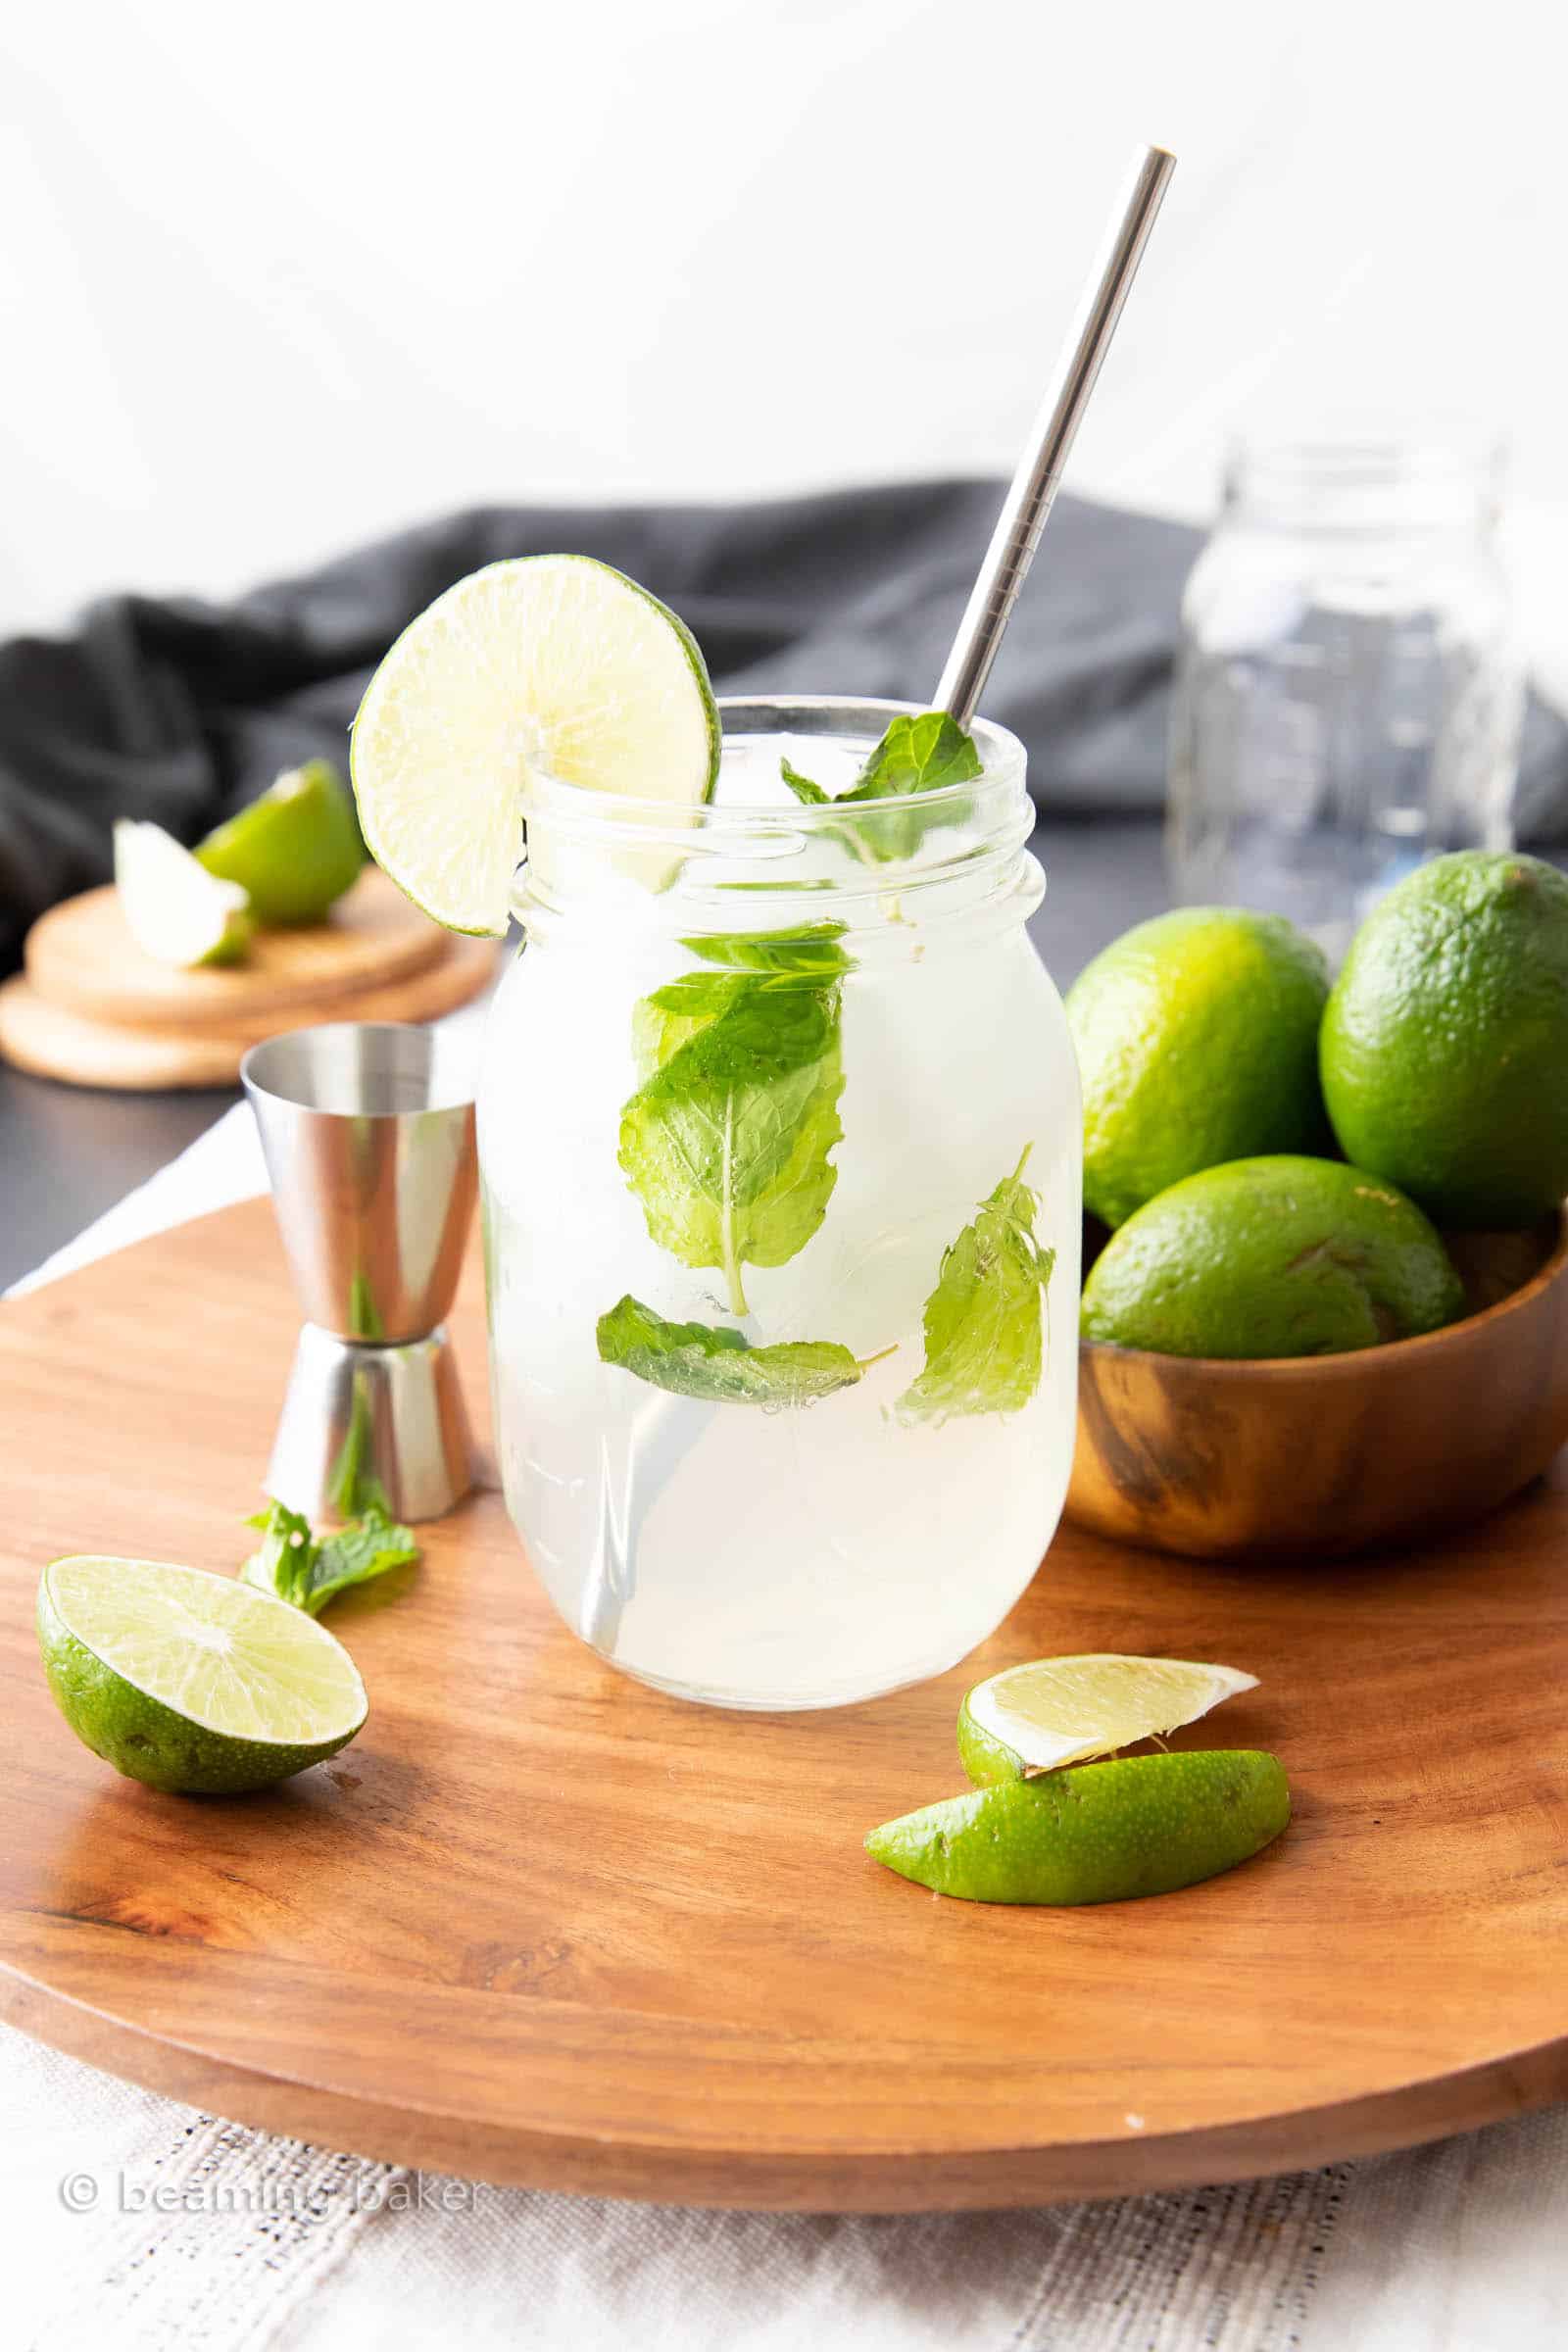 recipe for virgin mojito mocktail in a glass surround by limes